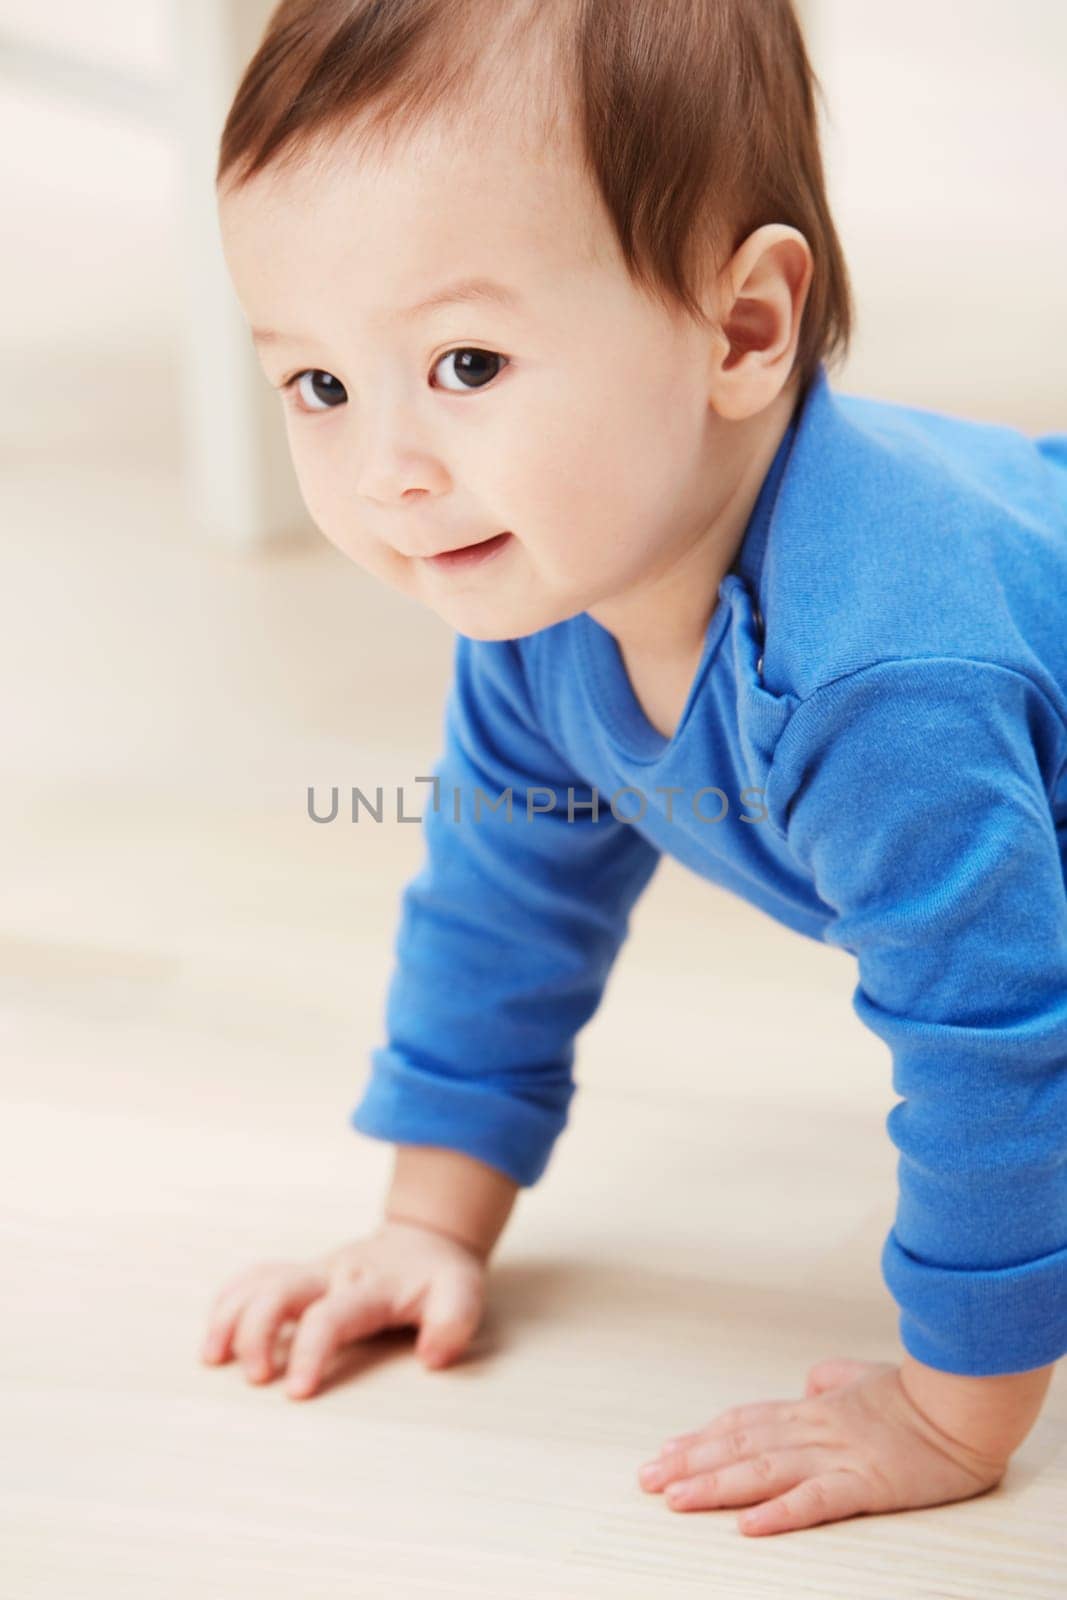 Cute, crawling and smile with baby on floor for child development, learning and youth. Young, curious and adorable with infant kid on ground of family home for growth, progress and first steps.